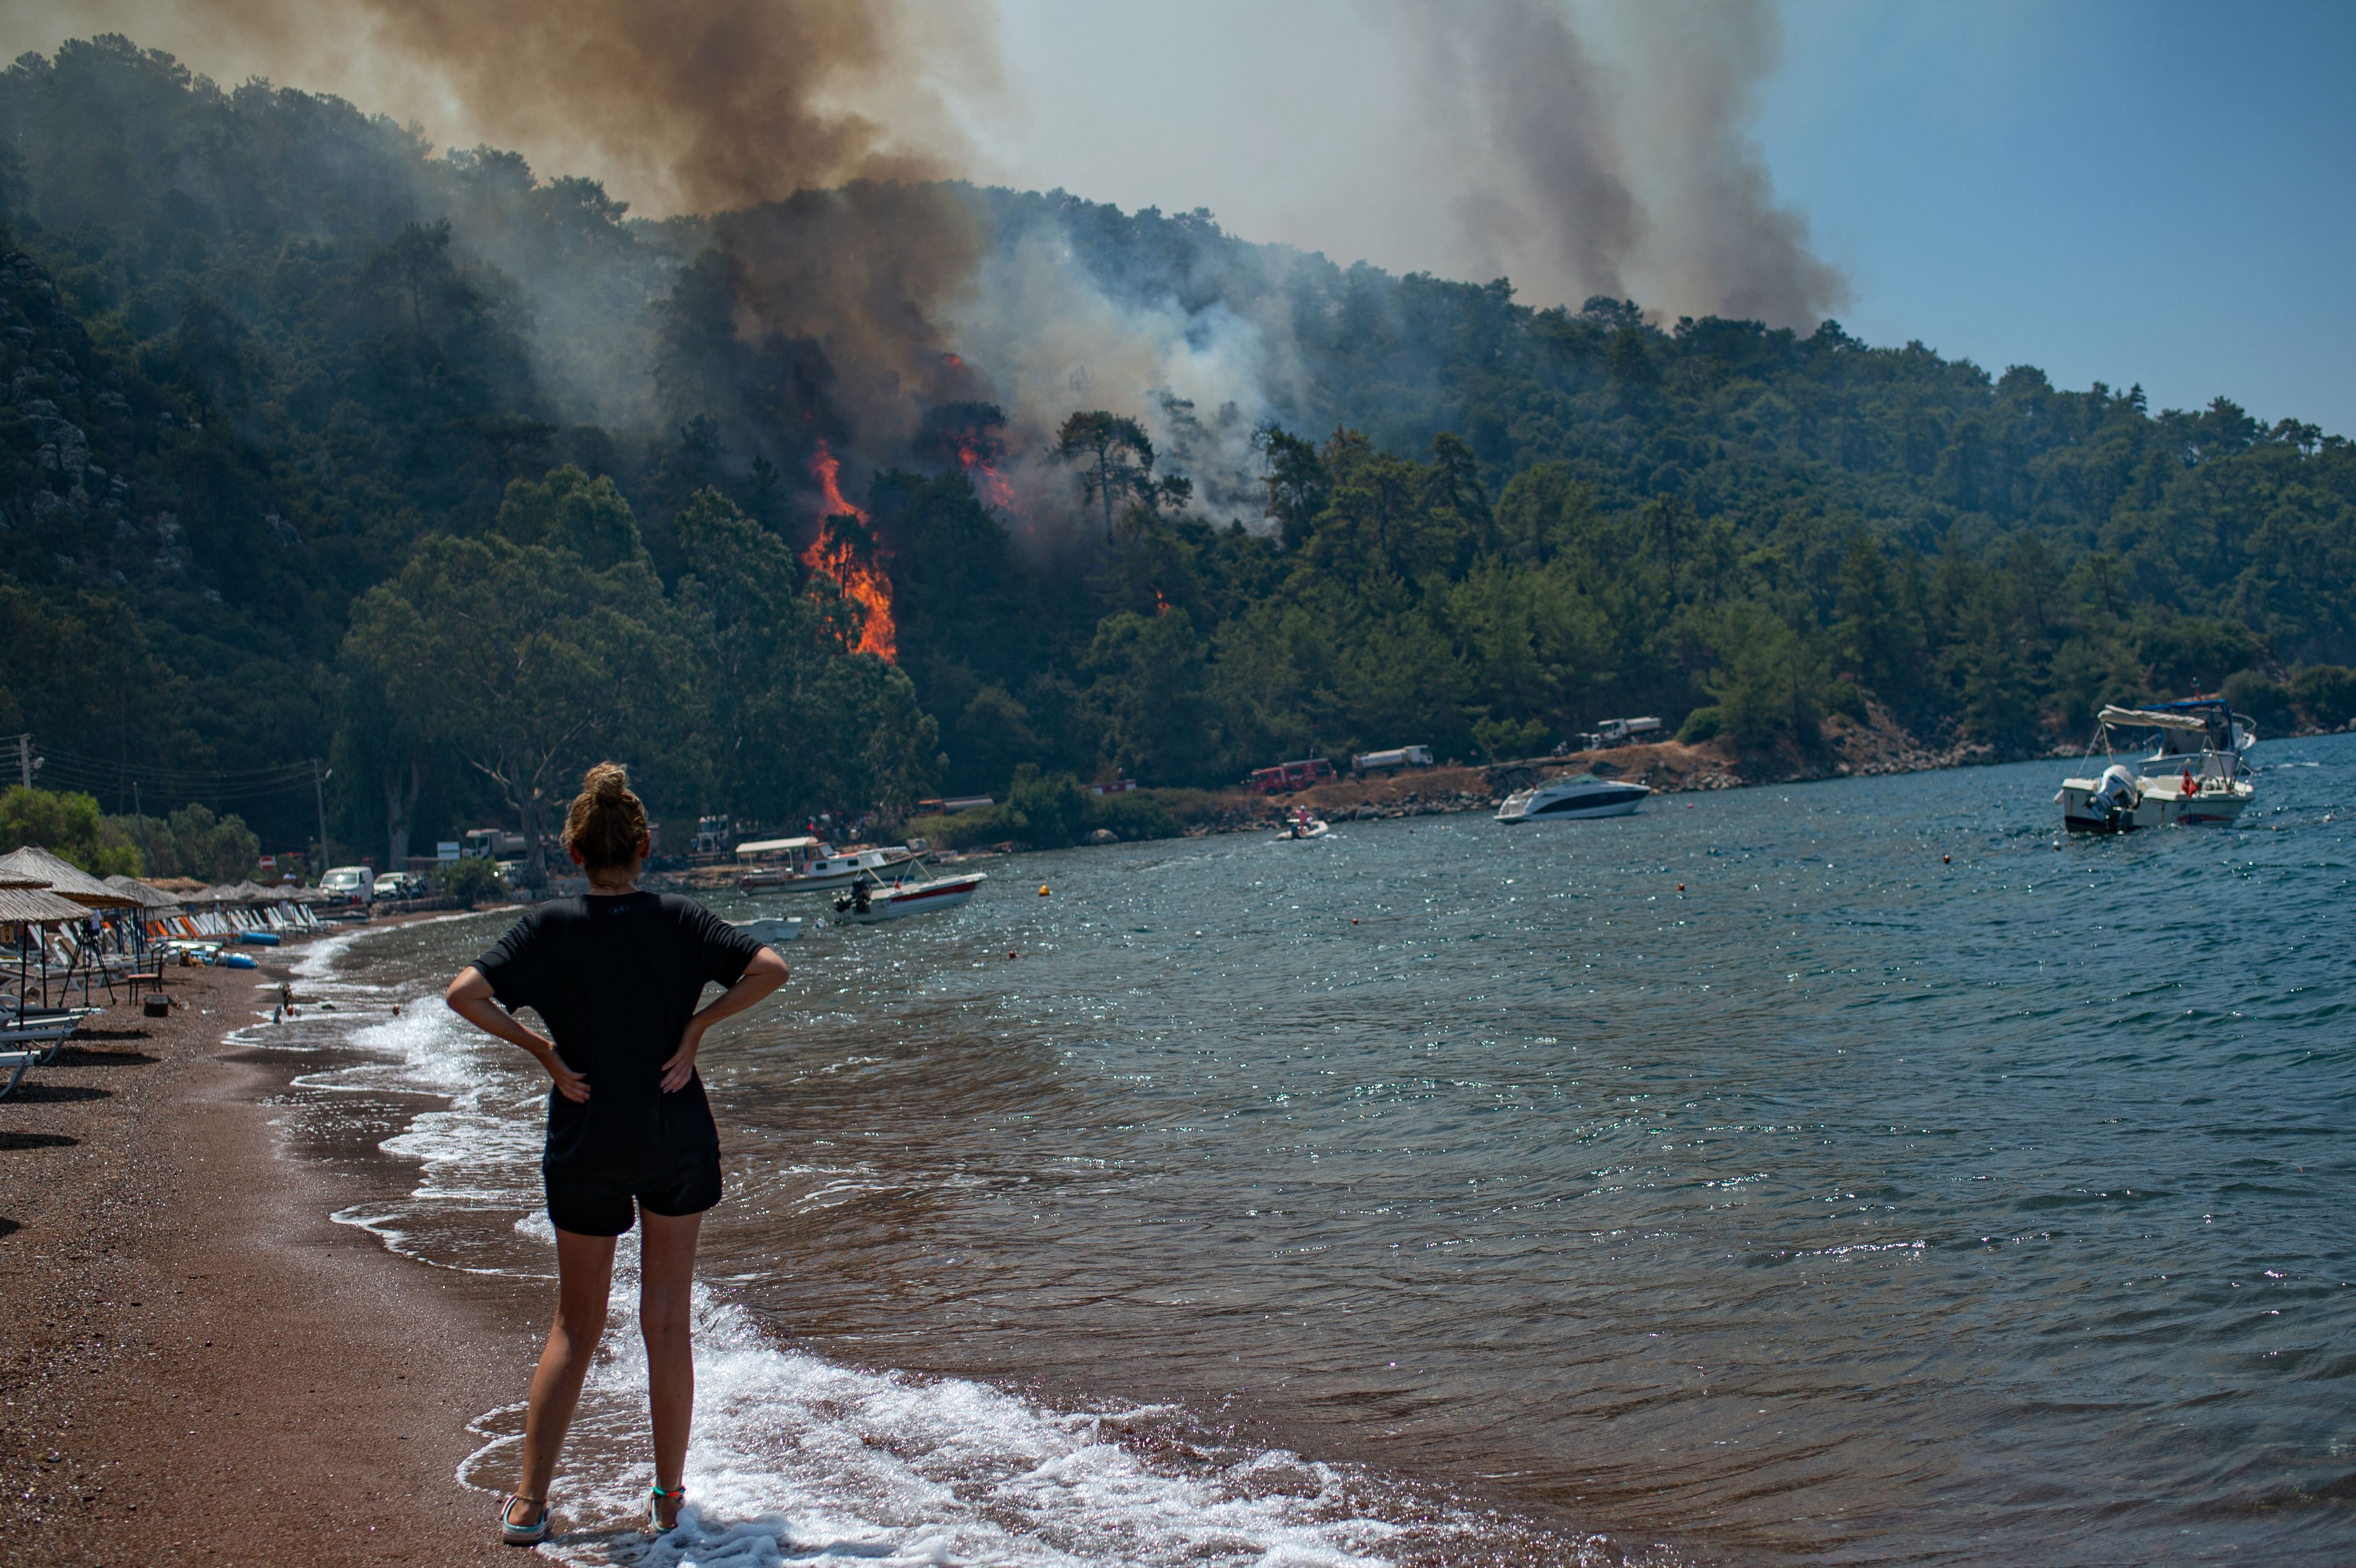 A woman standing on a beach watches the forest burning in Mugla, Turkey